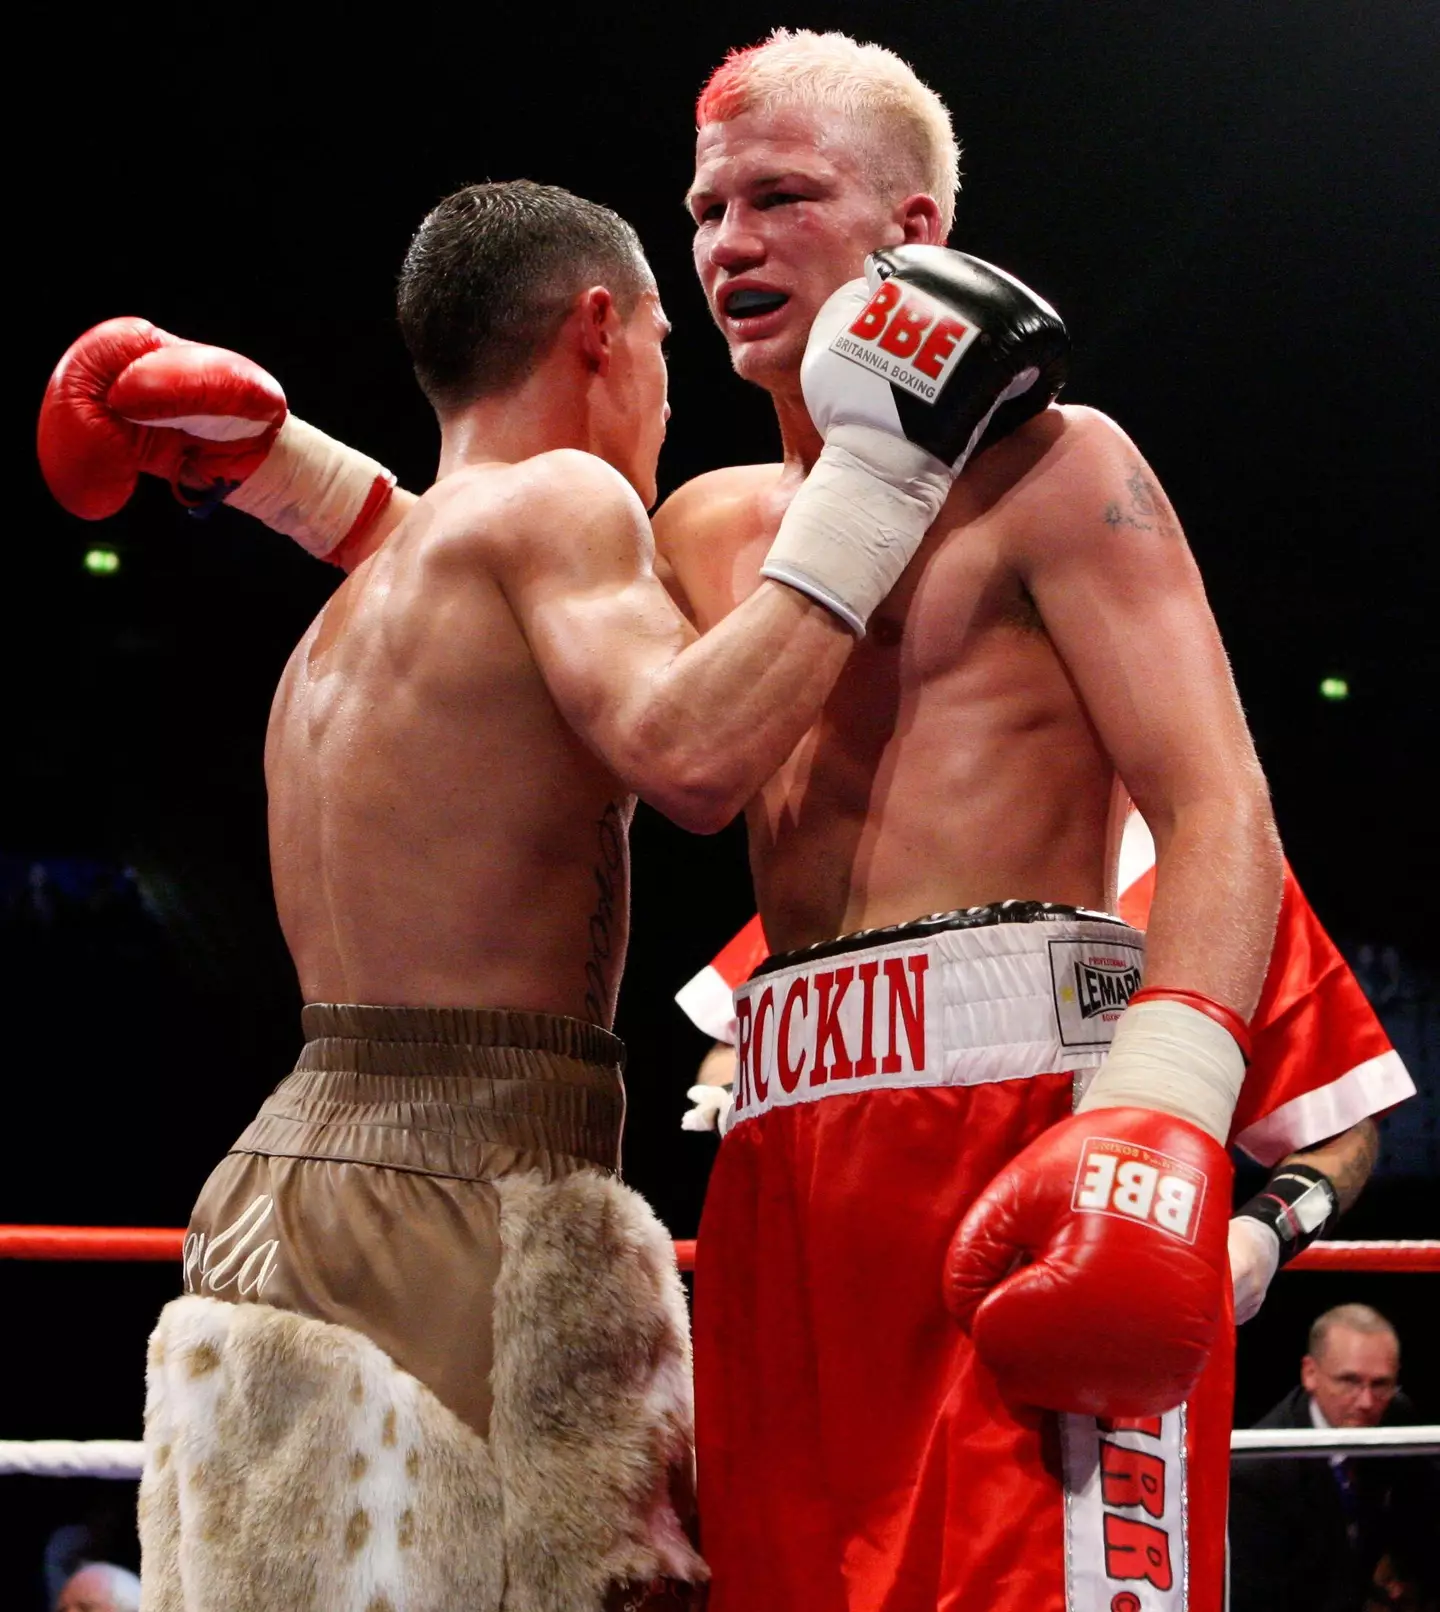 Deakin fought the likes of Anthony Crolla and Stephen Smith during his career (Image: Alamy)